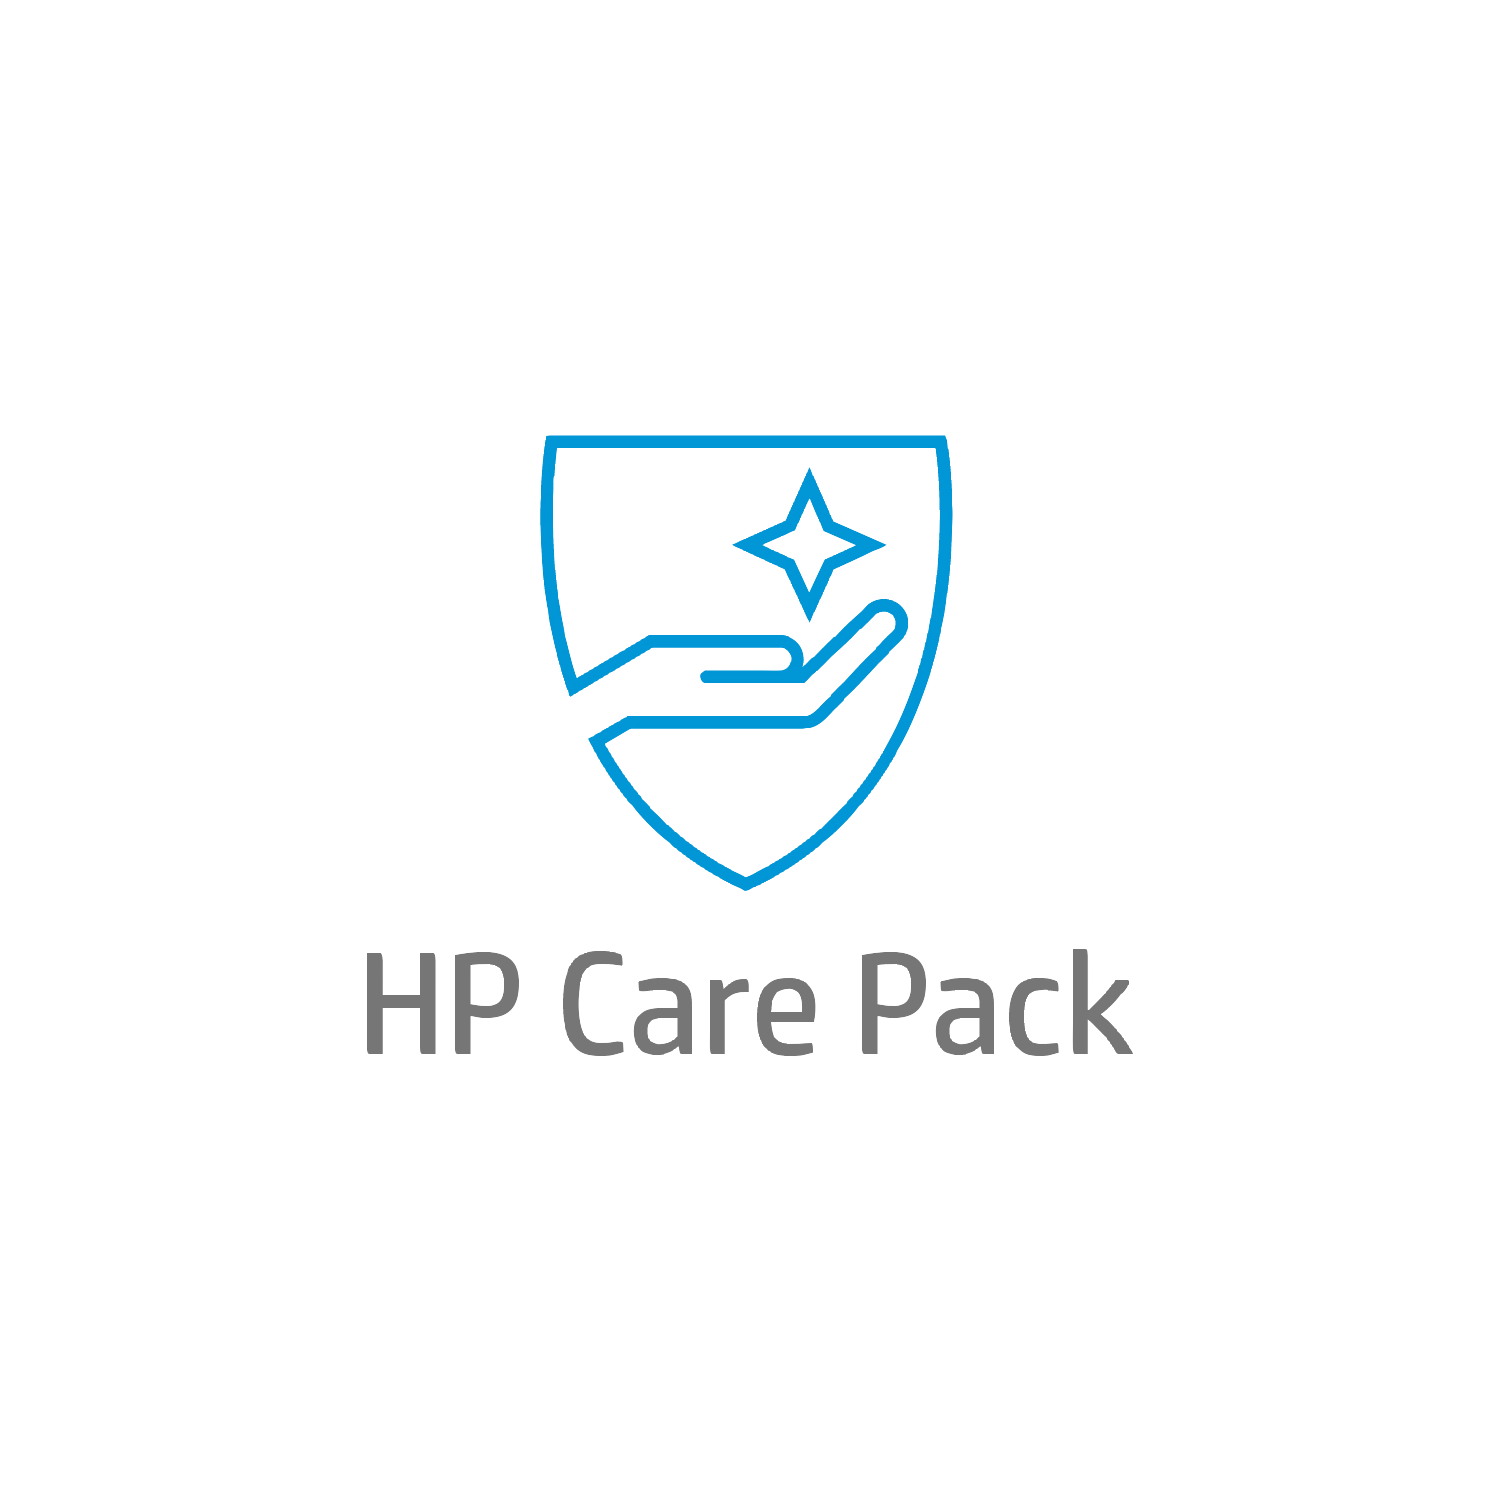 HP Electronic HP Care Pack Next Business Day Hardware Support with Defective Media Retention Post Wa